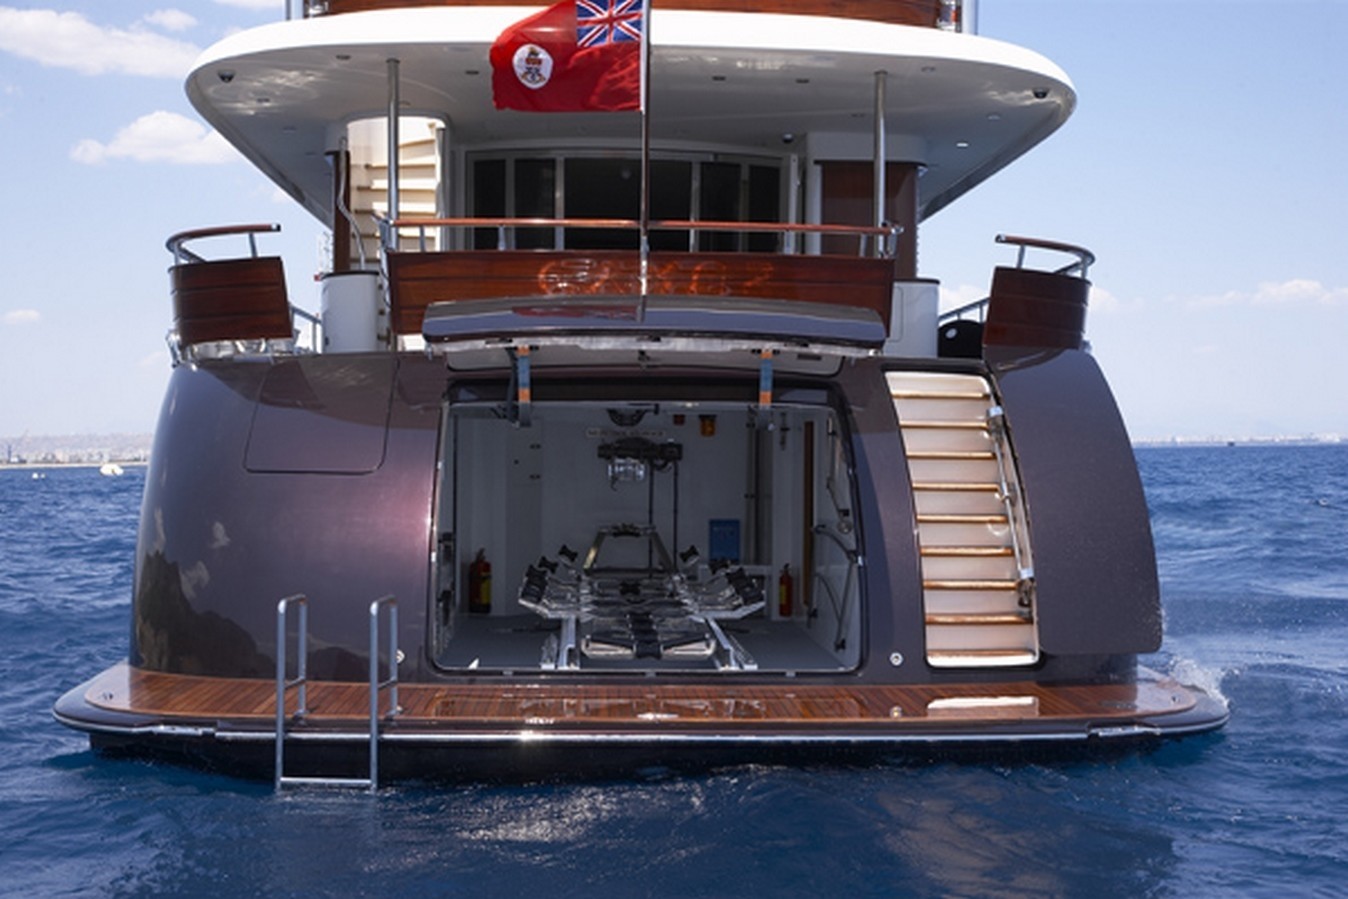 The 34m Yacht CYRUS ONE